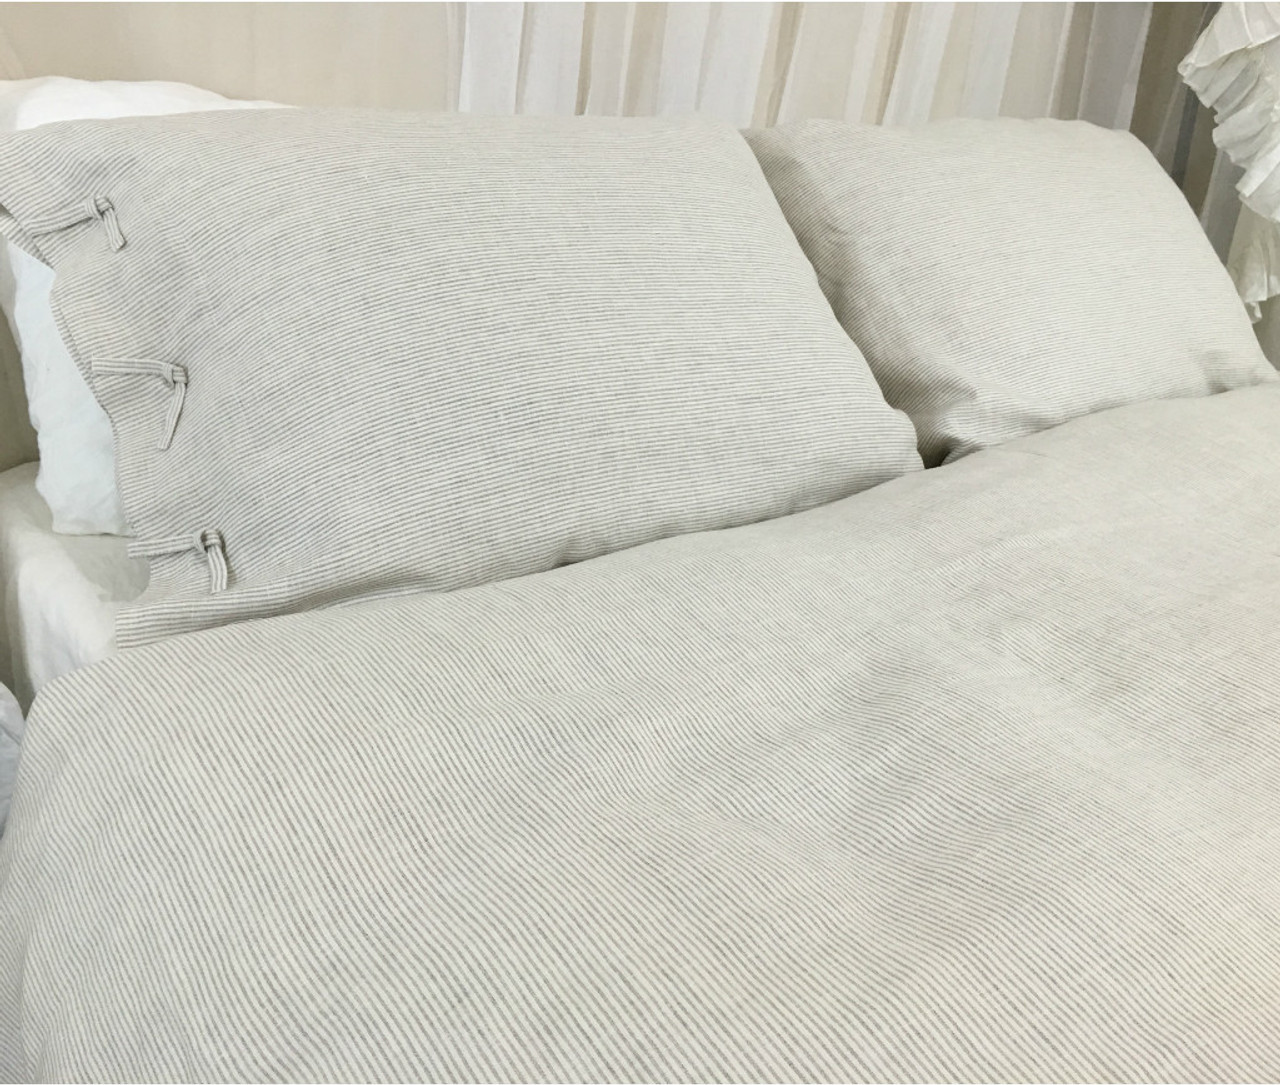 Natural Linen Ticking Striped Duvet Cover With Tie Closures